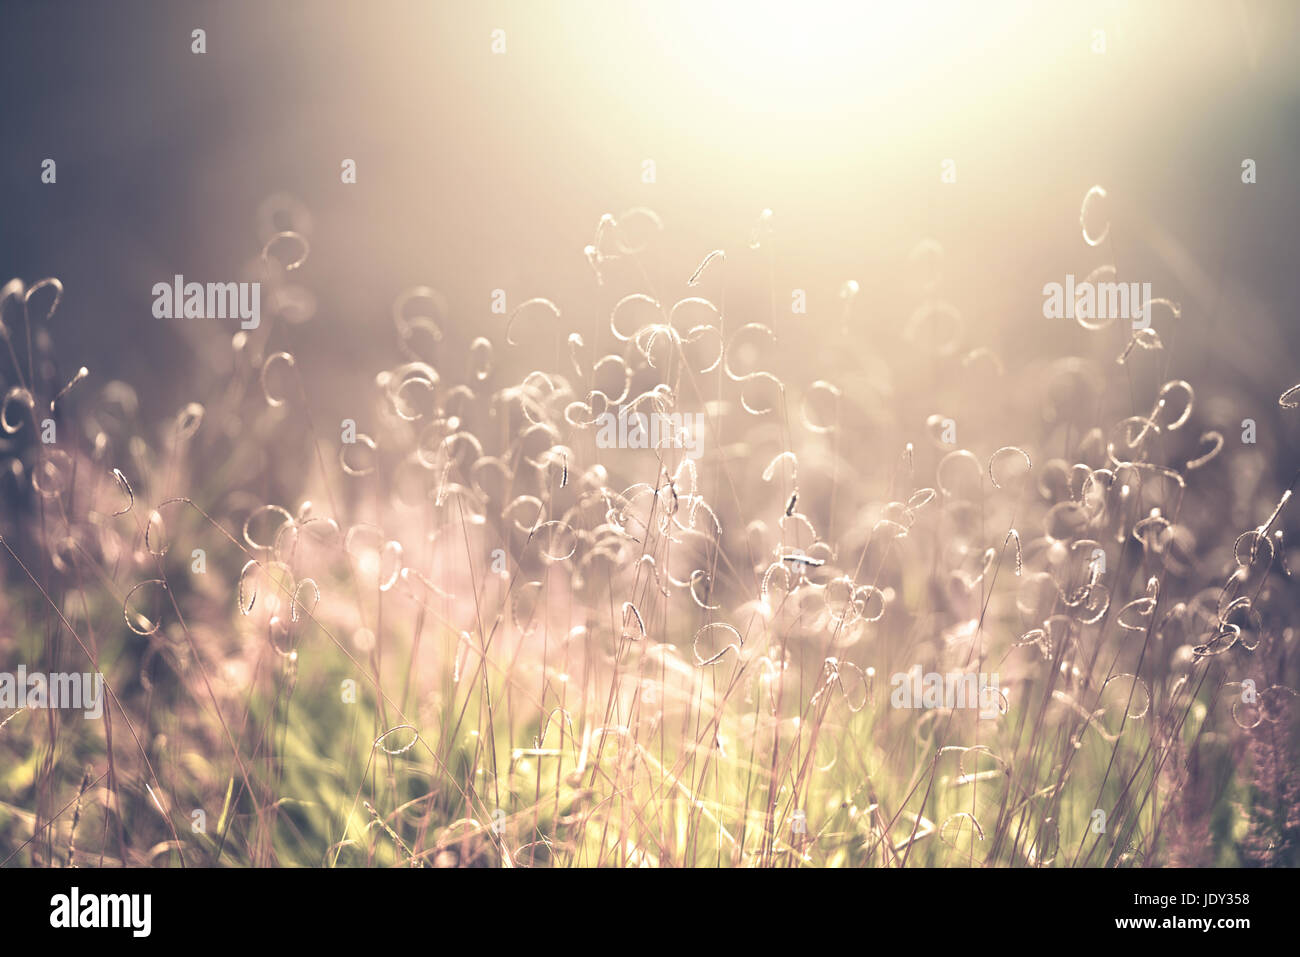 Nature outdoor image with shallow depth of field and blur for use as background Stock Photo